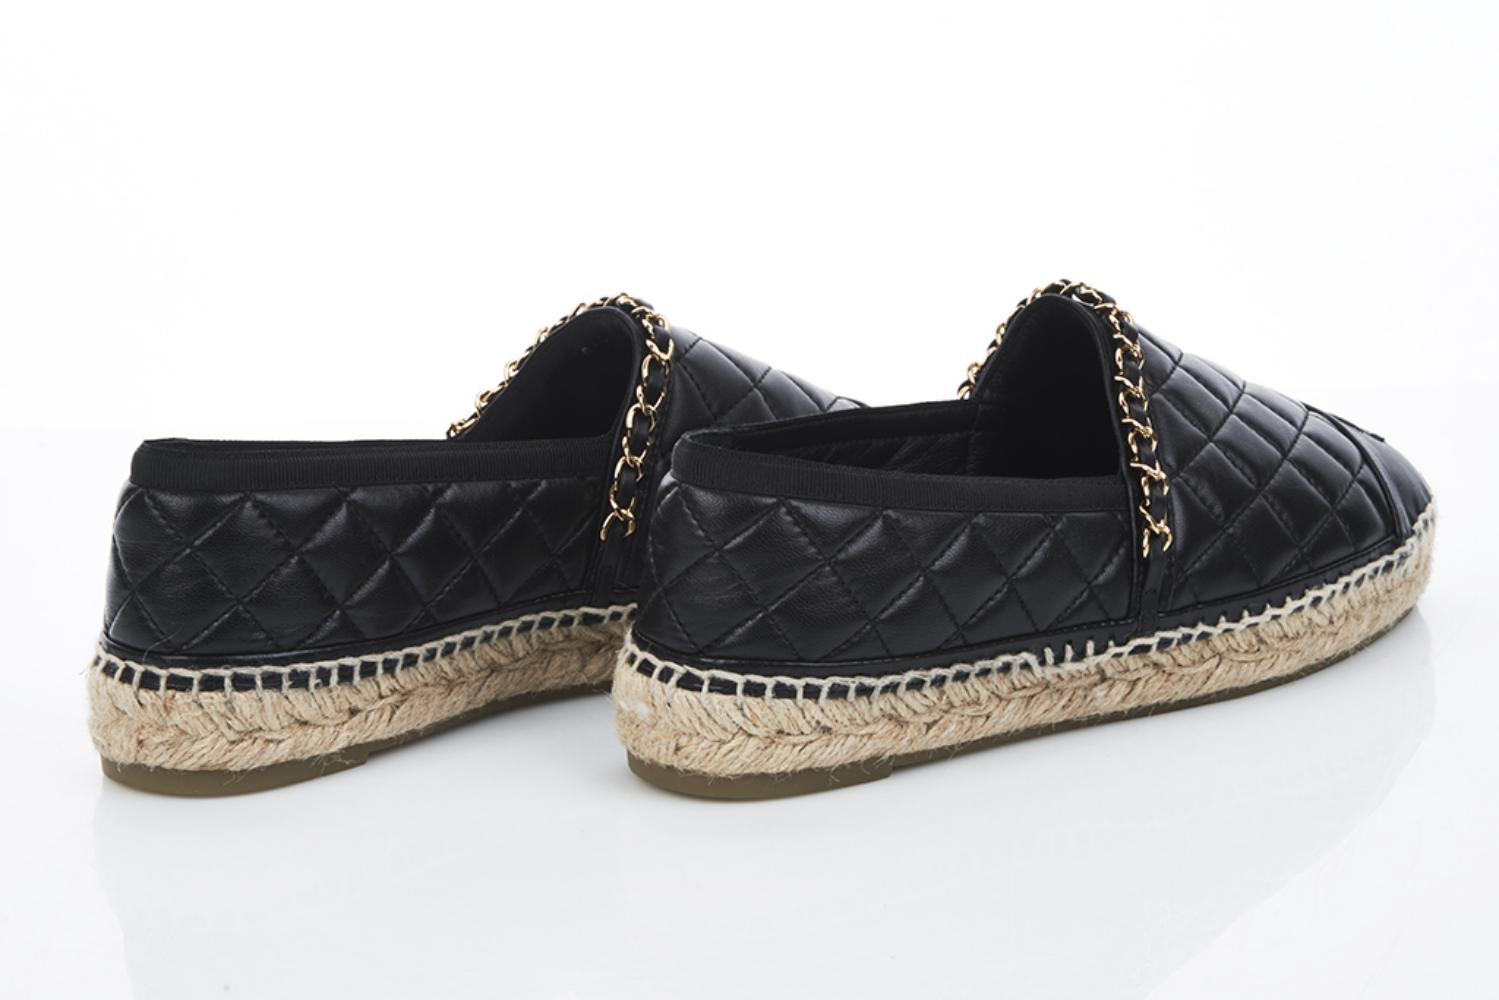 Chanel Quilted Black Leather Espadrilles - Size 38 EU / 8 US